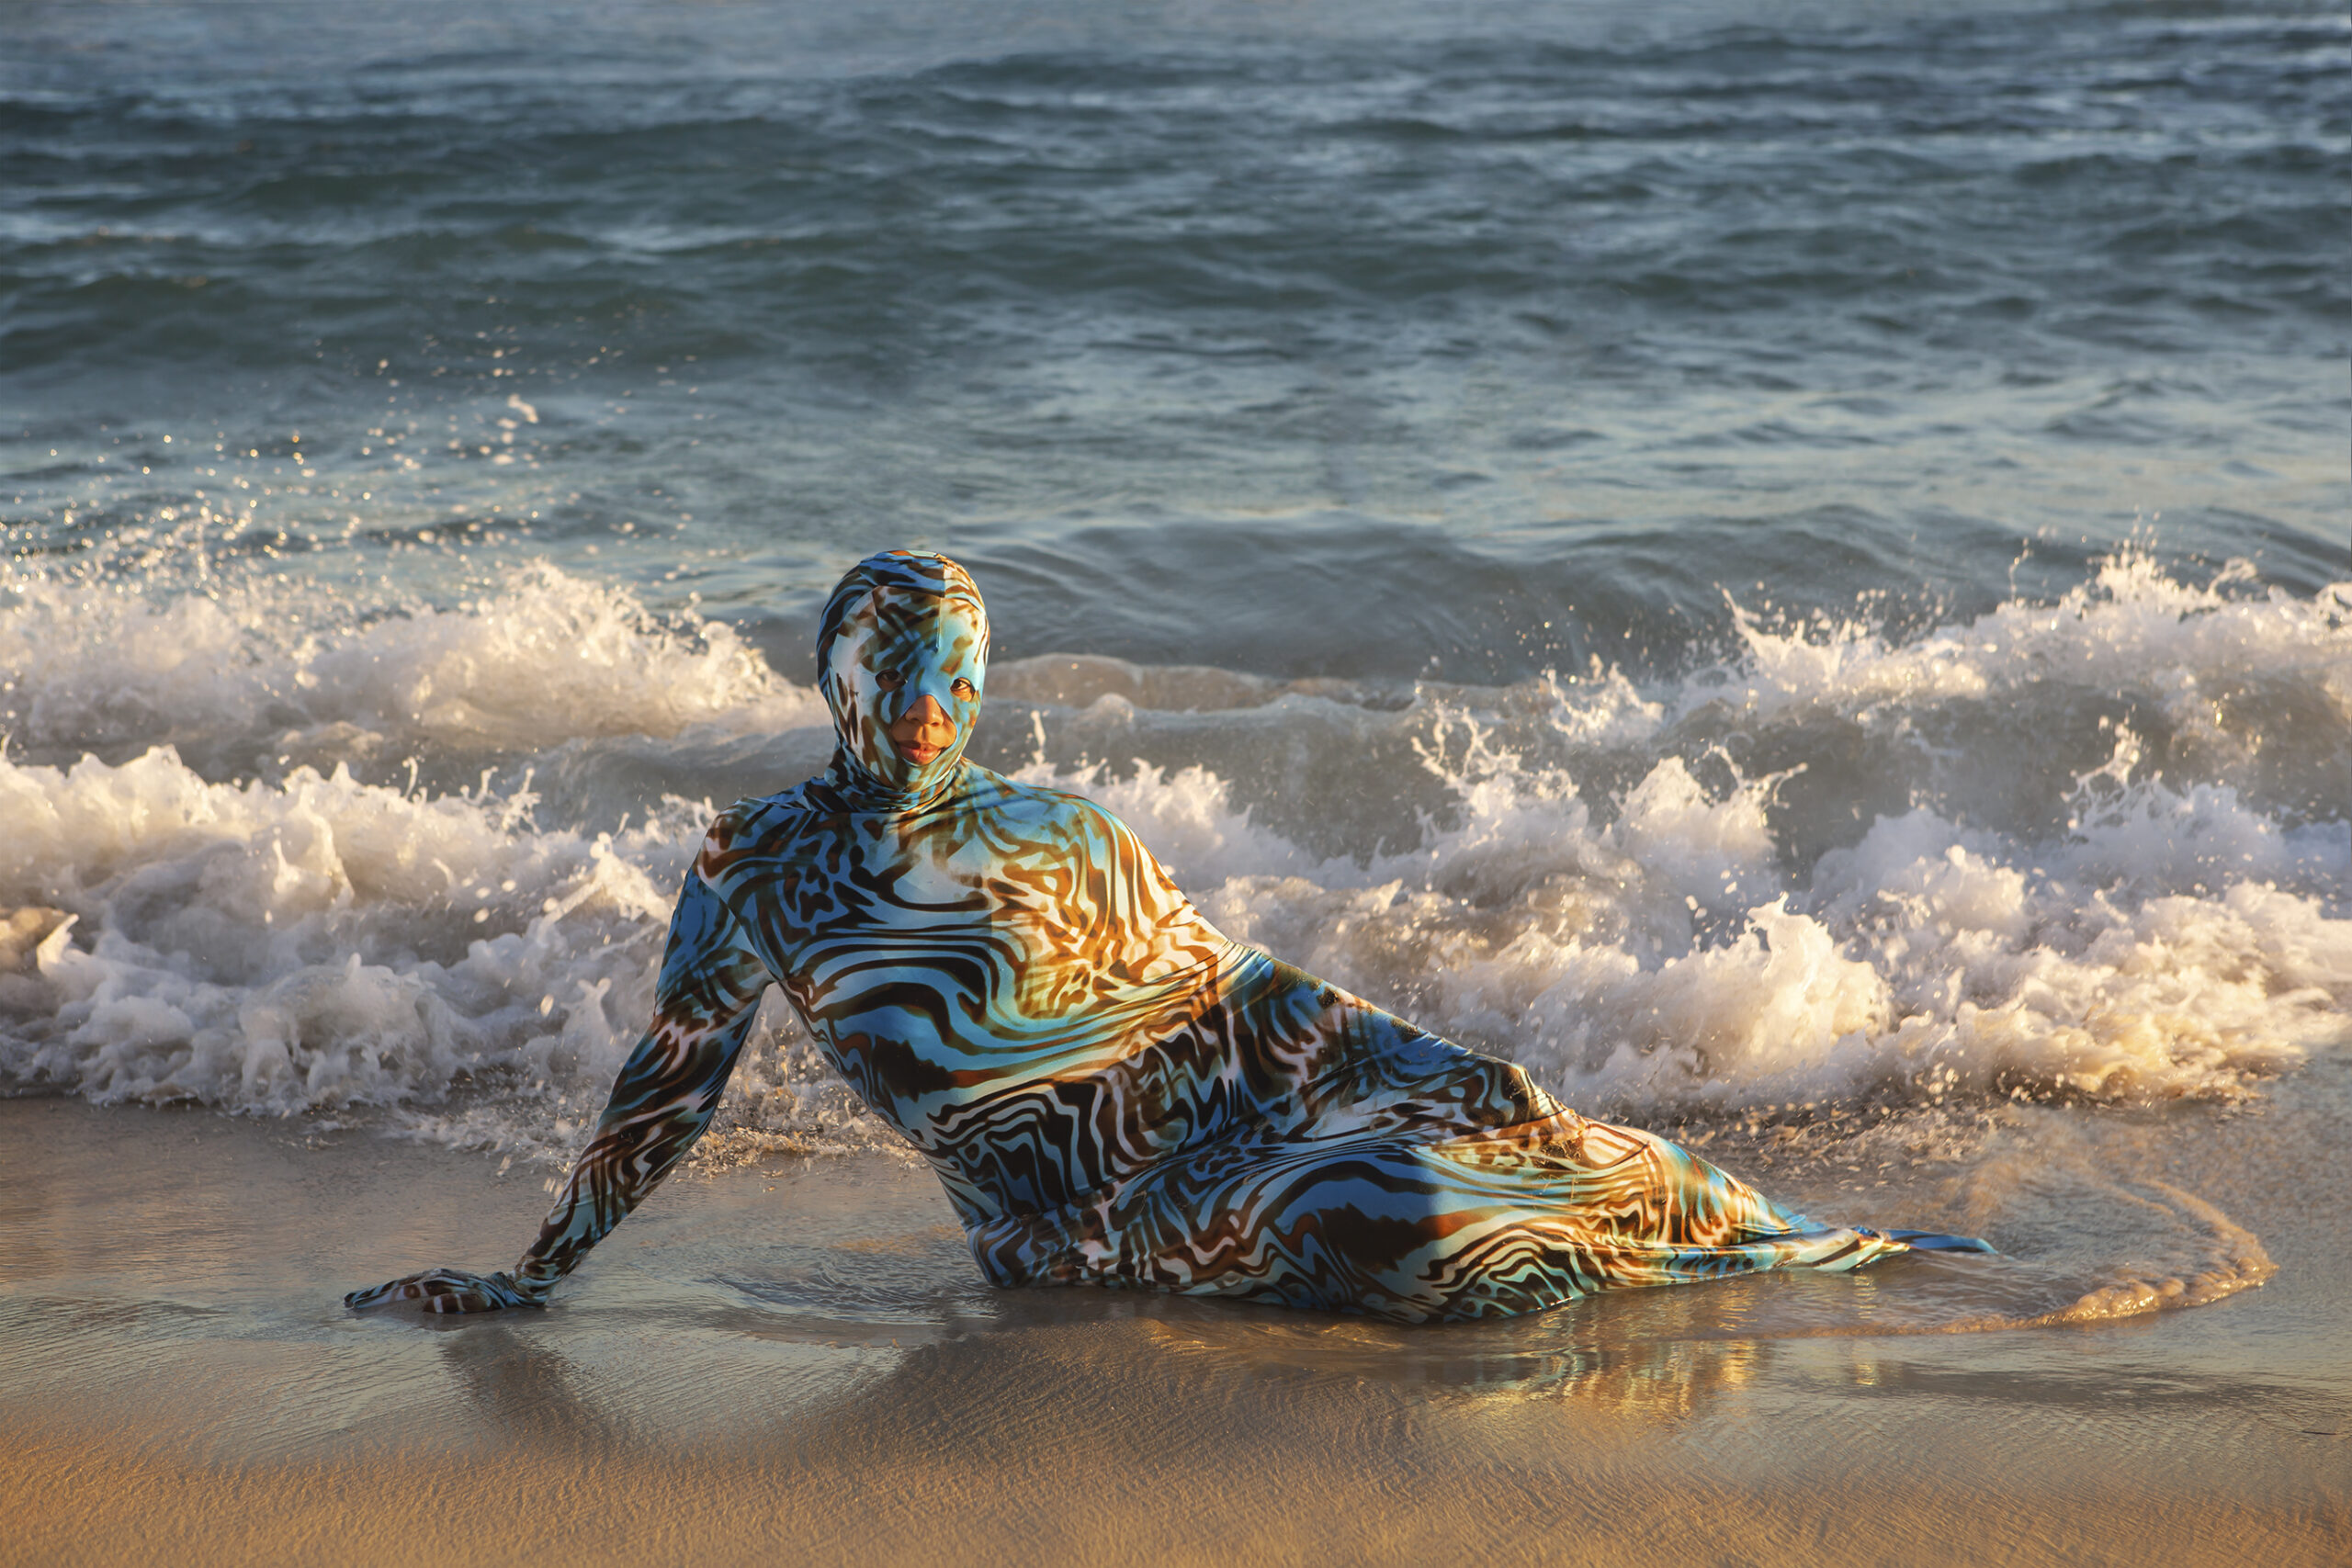 An image from Joiri Minaya's "Containers" photography series. Shows a woman lying on the beach, covered in a bodysuit.